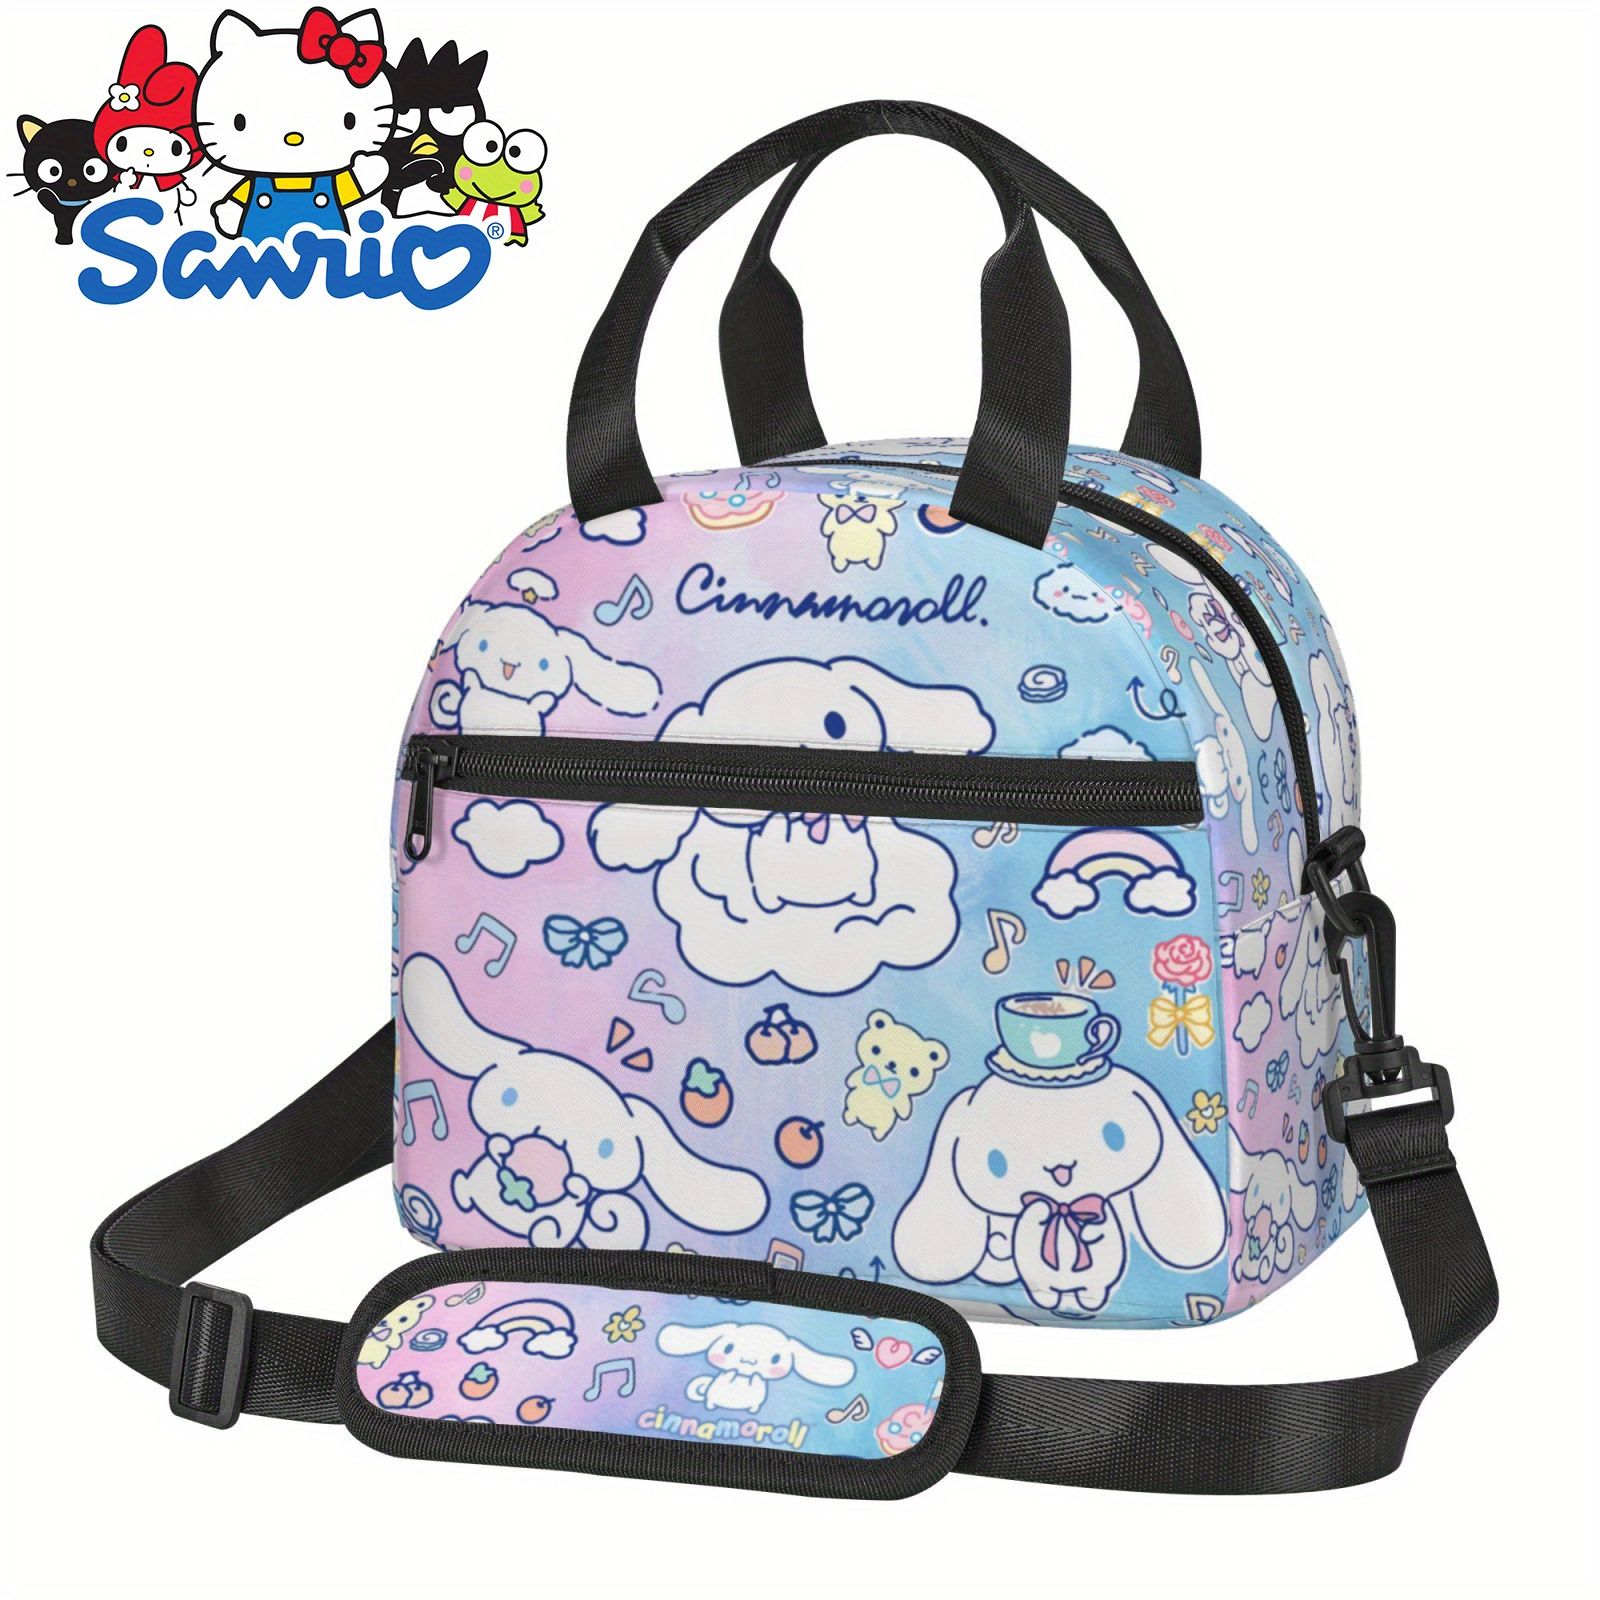 

1pc Authorized By Sanrio Cute Cinnamoroll Portable Lunch Bag With Carrying Strap For Women Lunch Holder Kawaii Lunch Tote Insulated Cooler Bag For Office Work